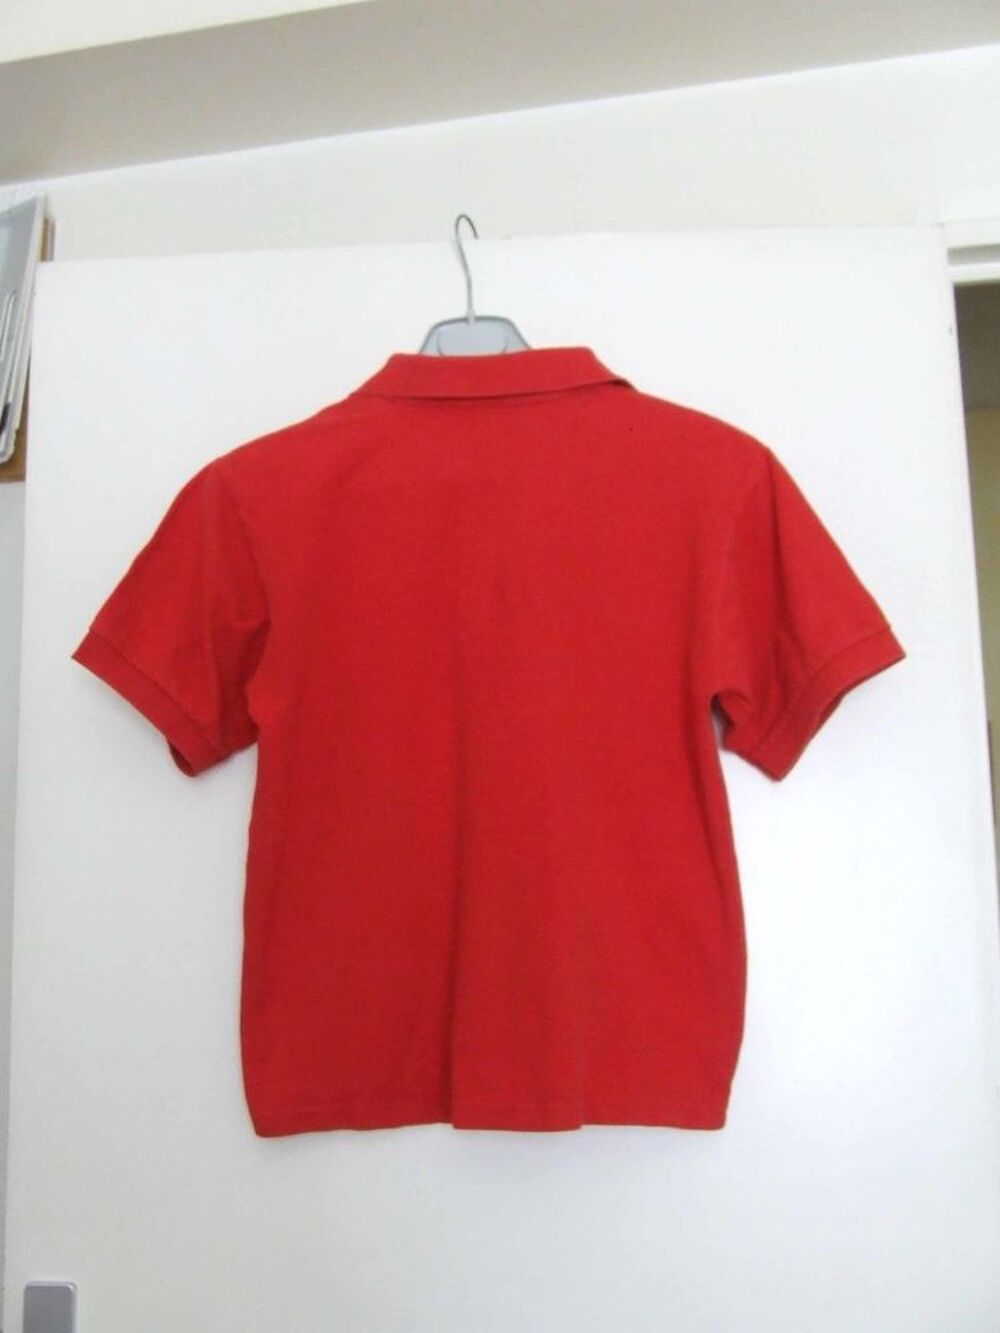 Polo manches courtes, RODIER, Rouge, Taille M, TBE Vtements